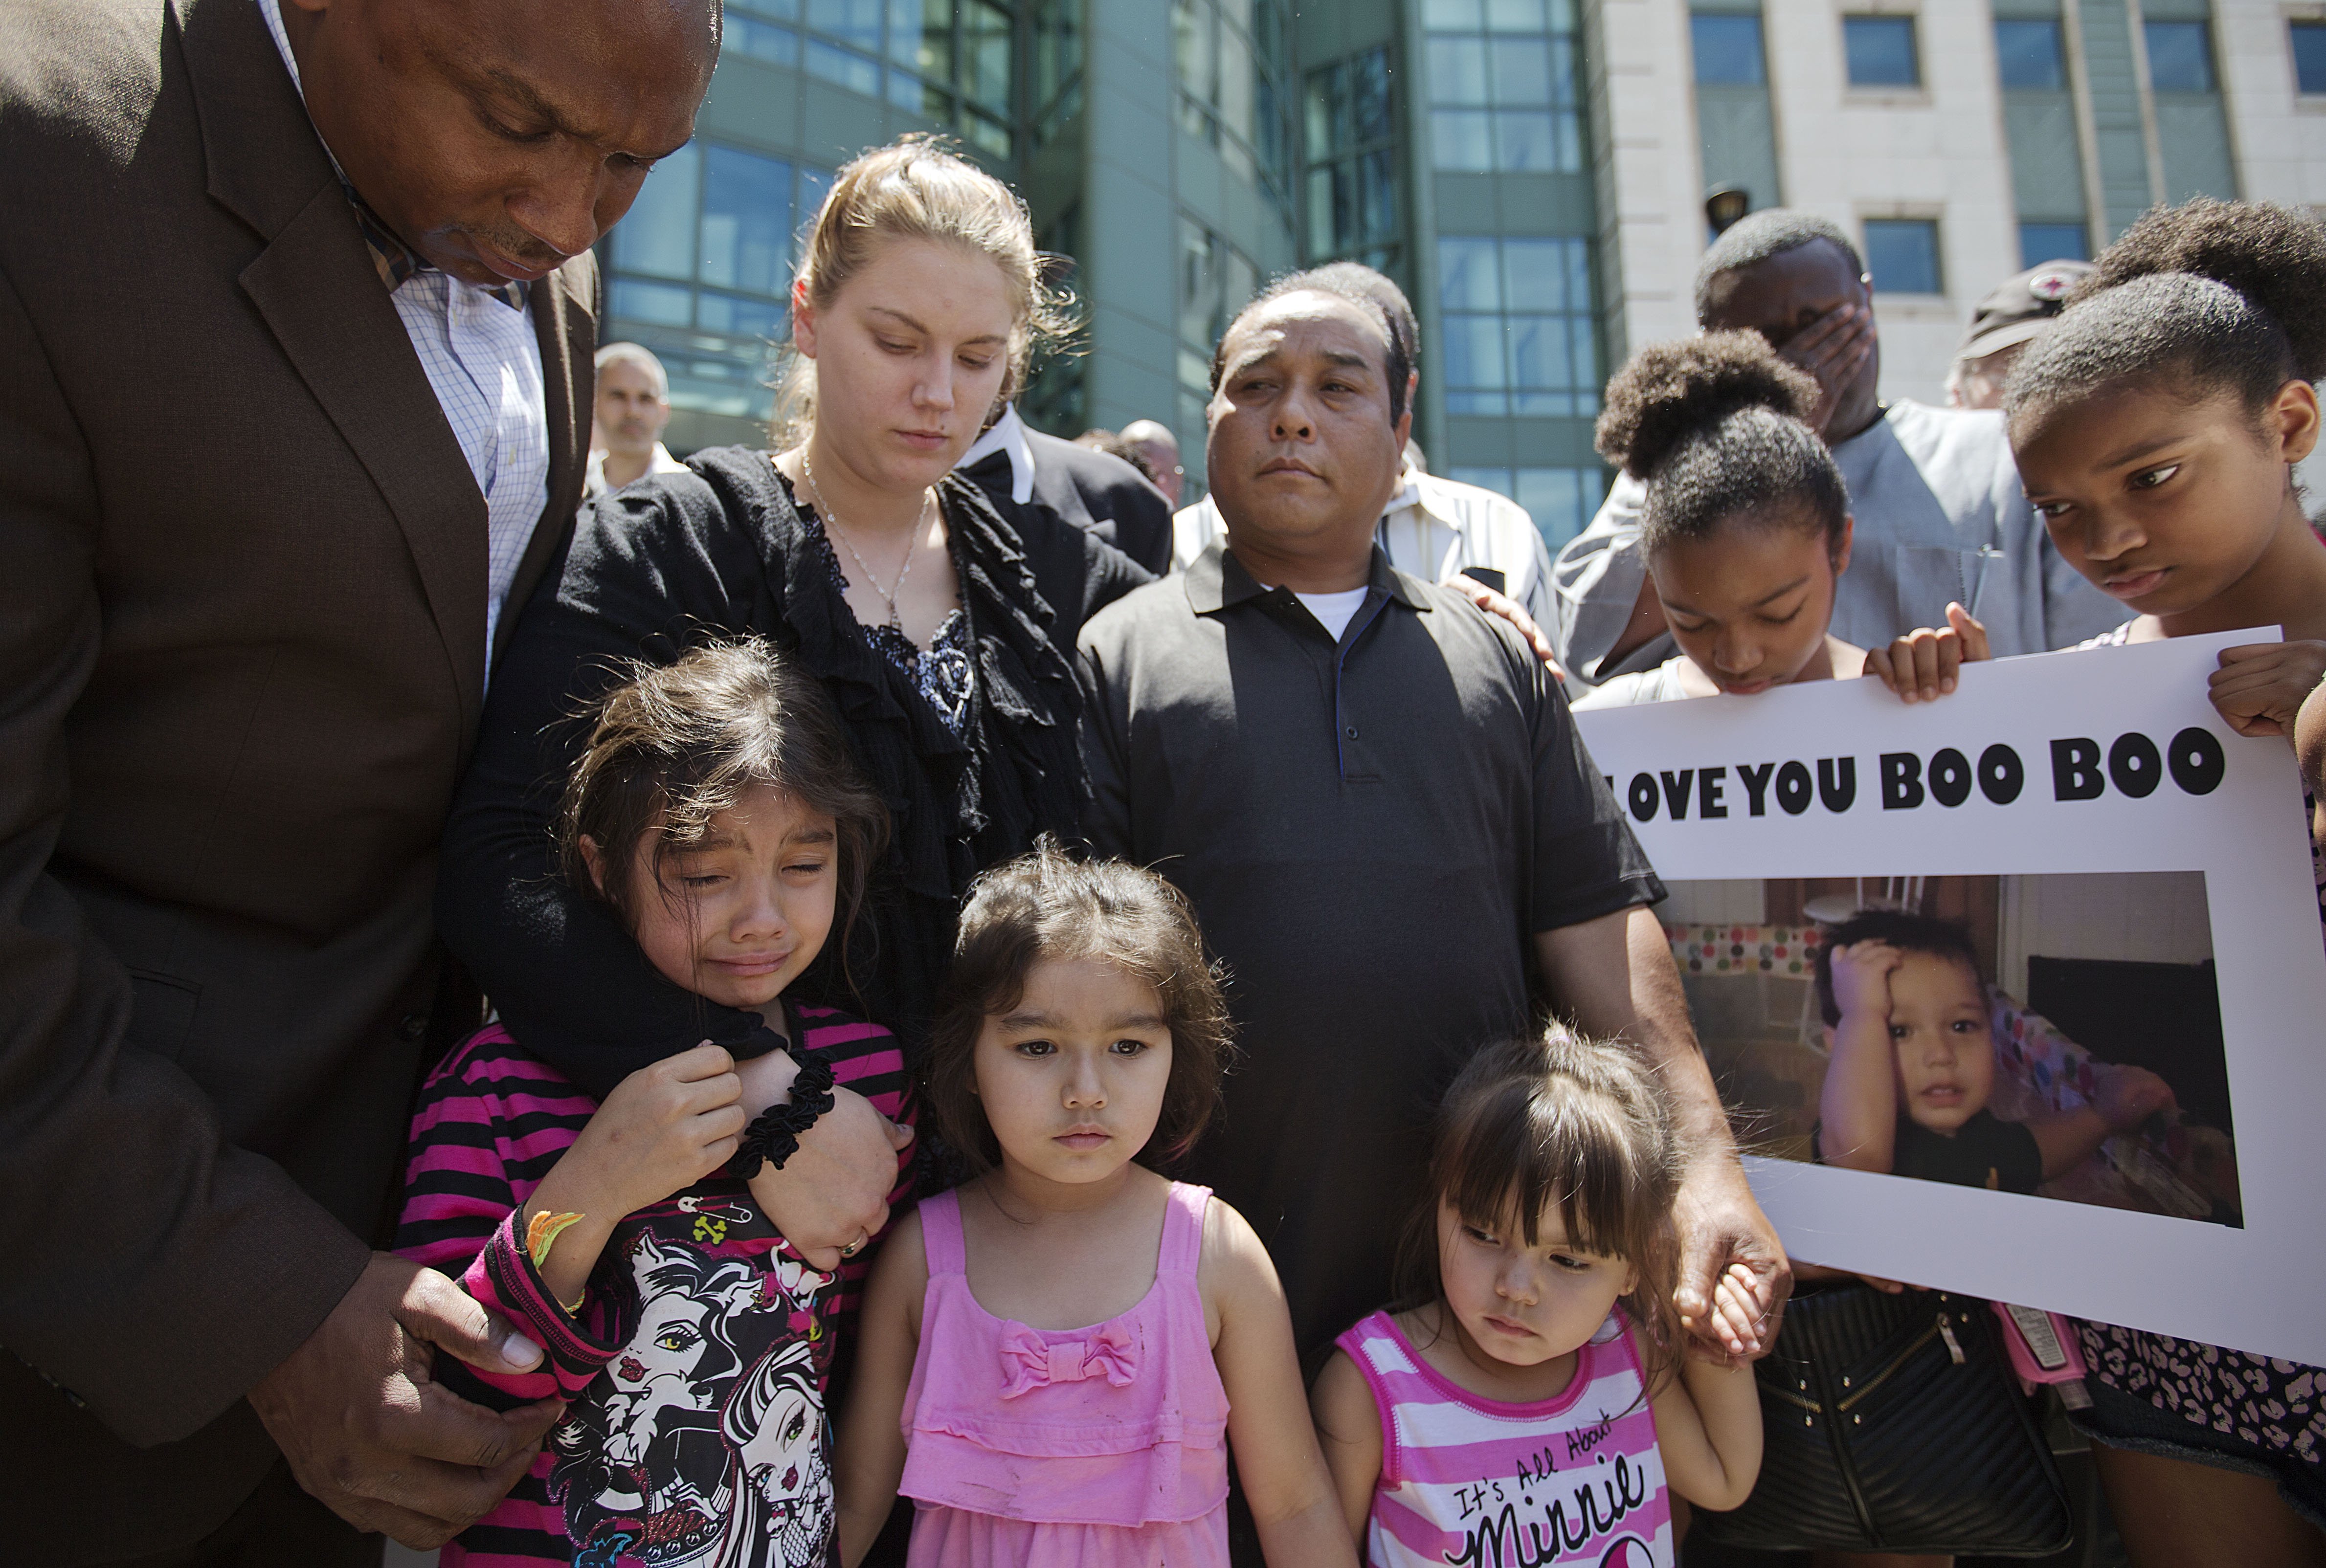 Alecia and Boun Khan Phonesavanh (center), the parents of 19-month-old Bounkham Phonesavanh who was severely burned by a flash grenade during a SWAT drug raid, attend a vigil with their daughters outside Grady Memorial Hospital where he is undergoing treatment, on June 2, 2014, in Atlanta.